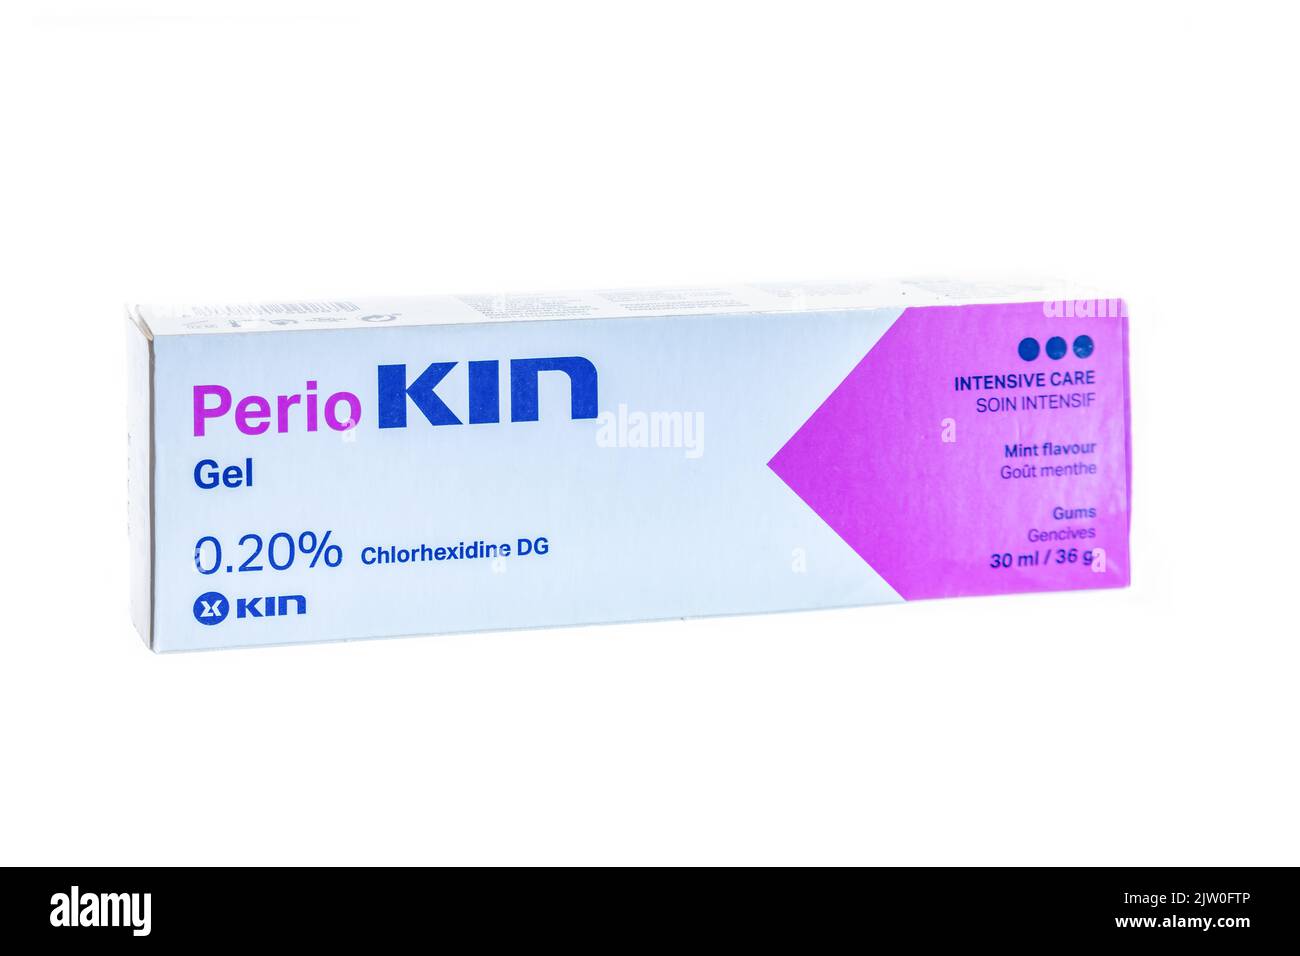 Huelva, Spain - September 2, 2022: Perio Kin chlorhexidine 0.20% gel for periodontal and peri-implant treatment. It is bioadhesive for topical applica Stock Photo